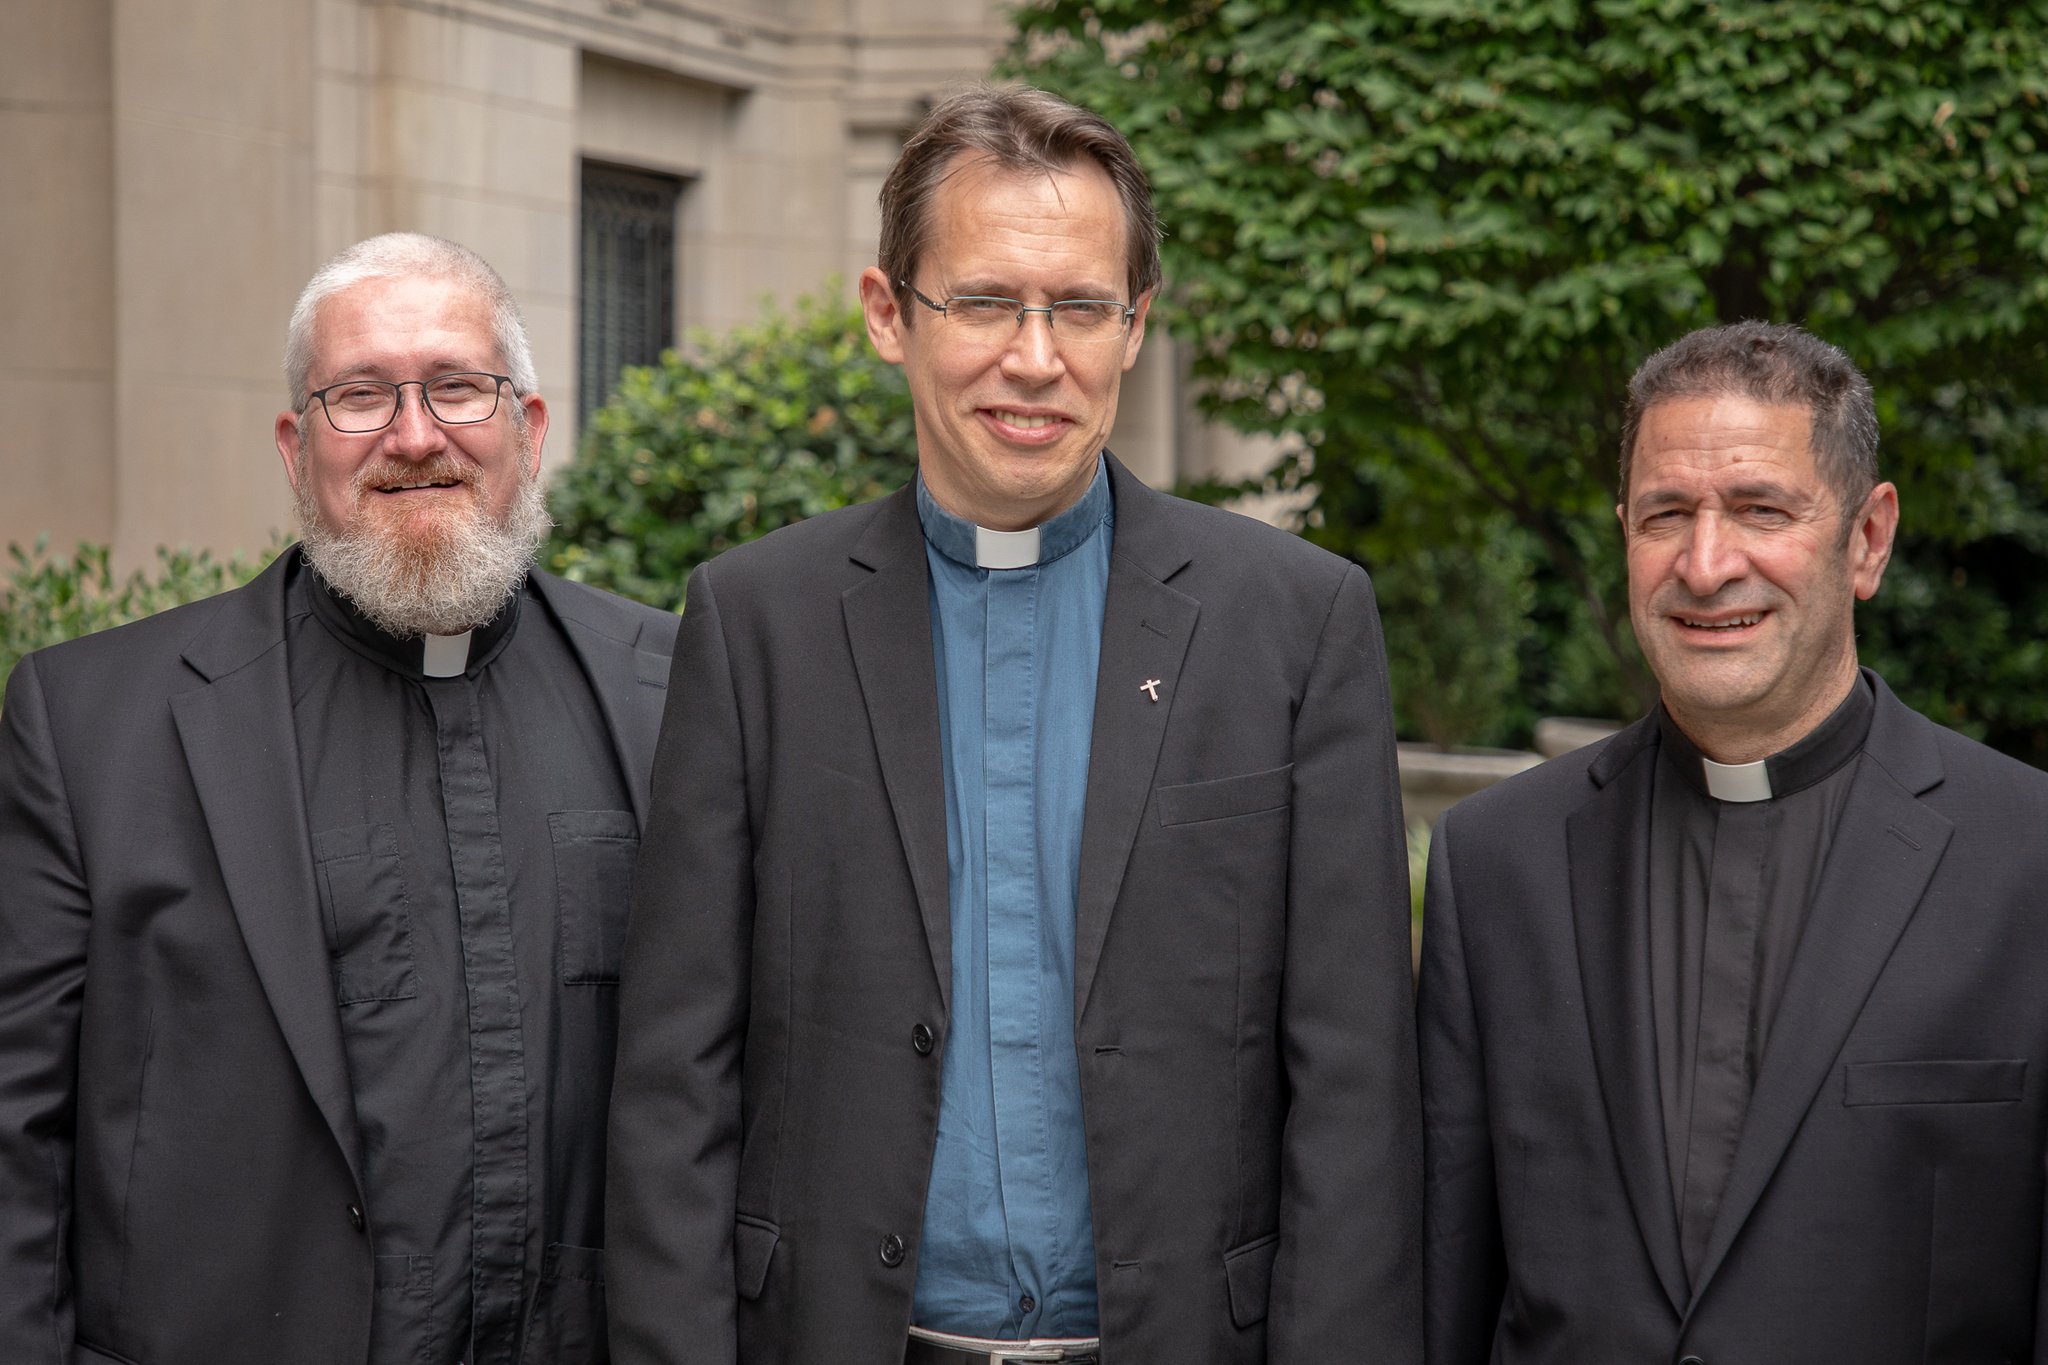 Father Blazek and Father Fornos visit the President of the Jesuit Conference of Canada and the United States